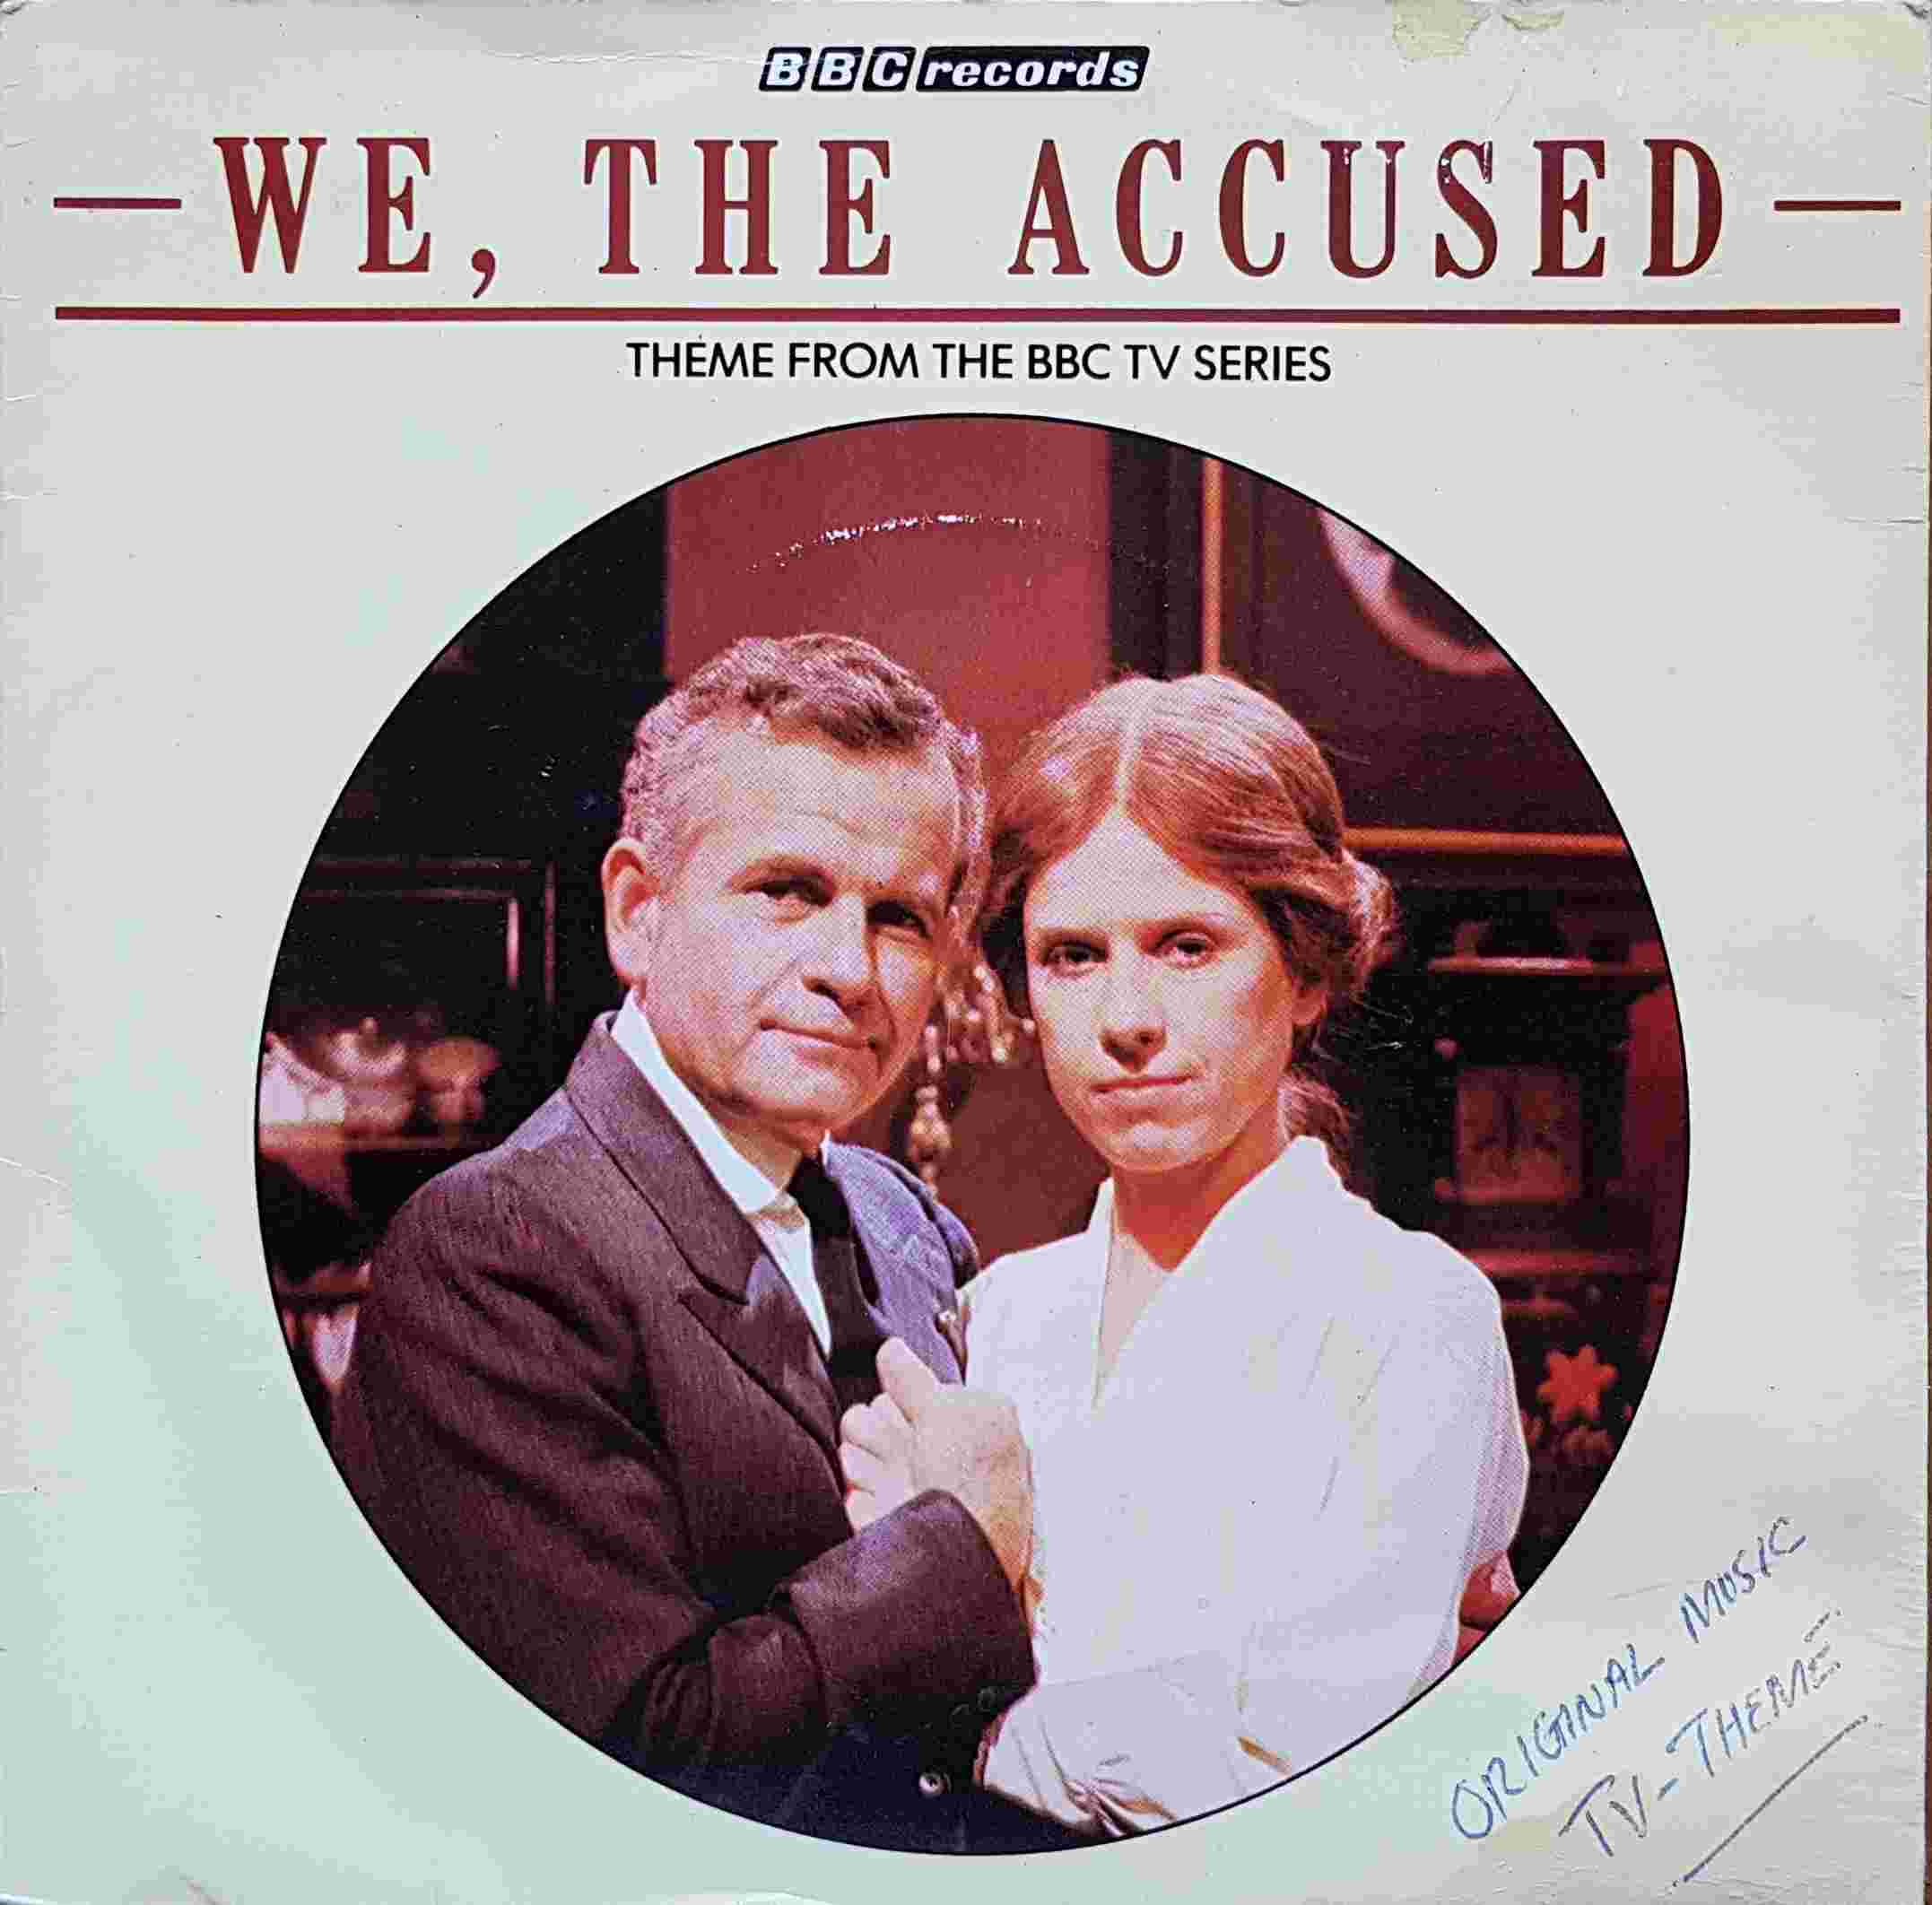 Picture of RESL 83 We, the accused by artist Daryl Runswick from the BBC records and Tapes library